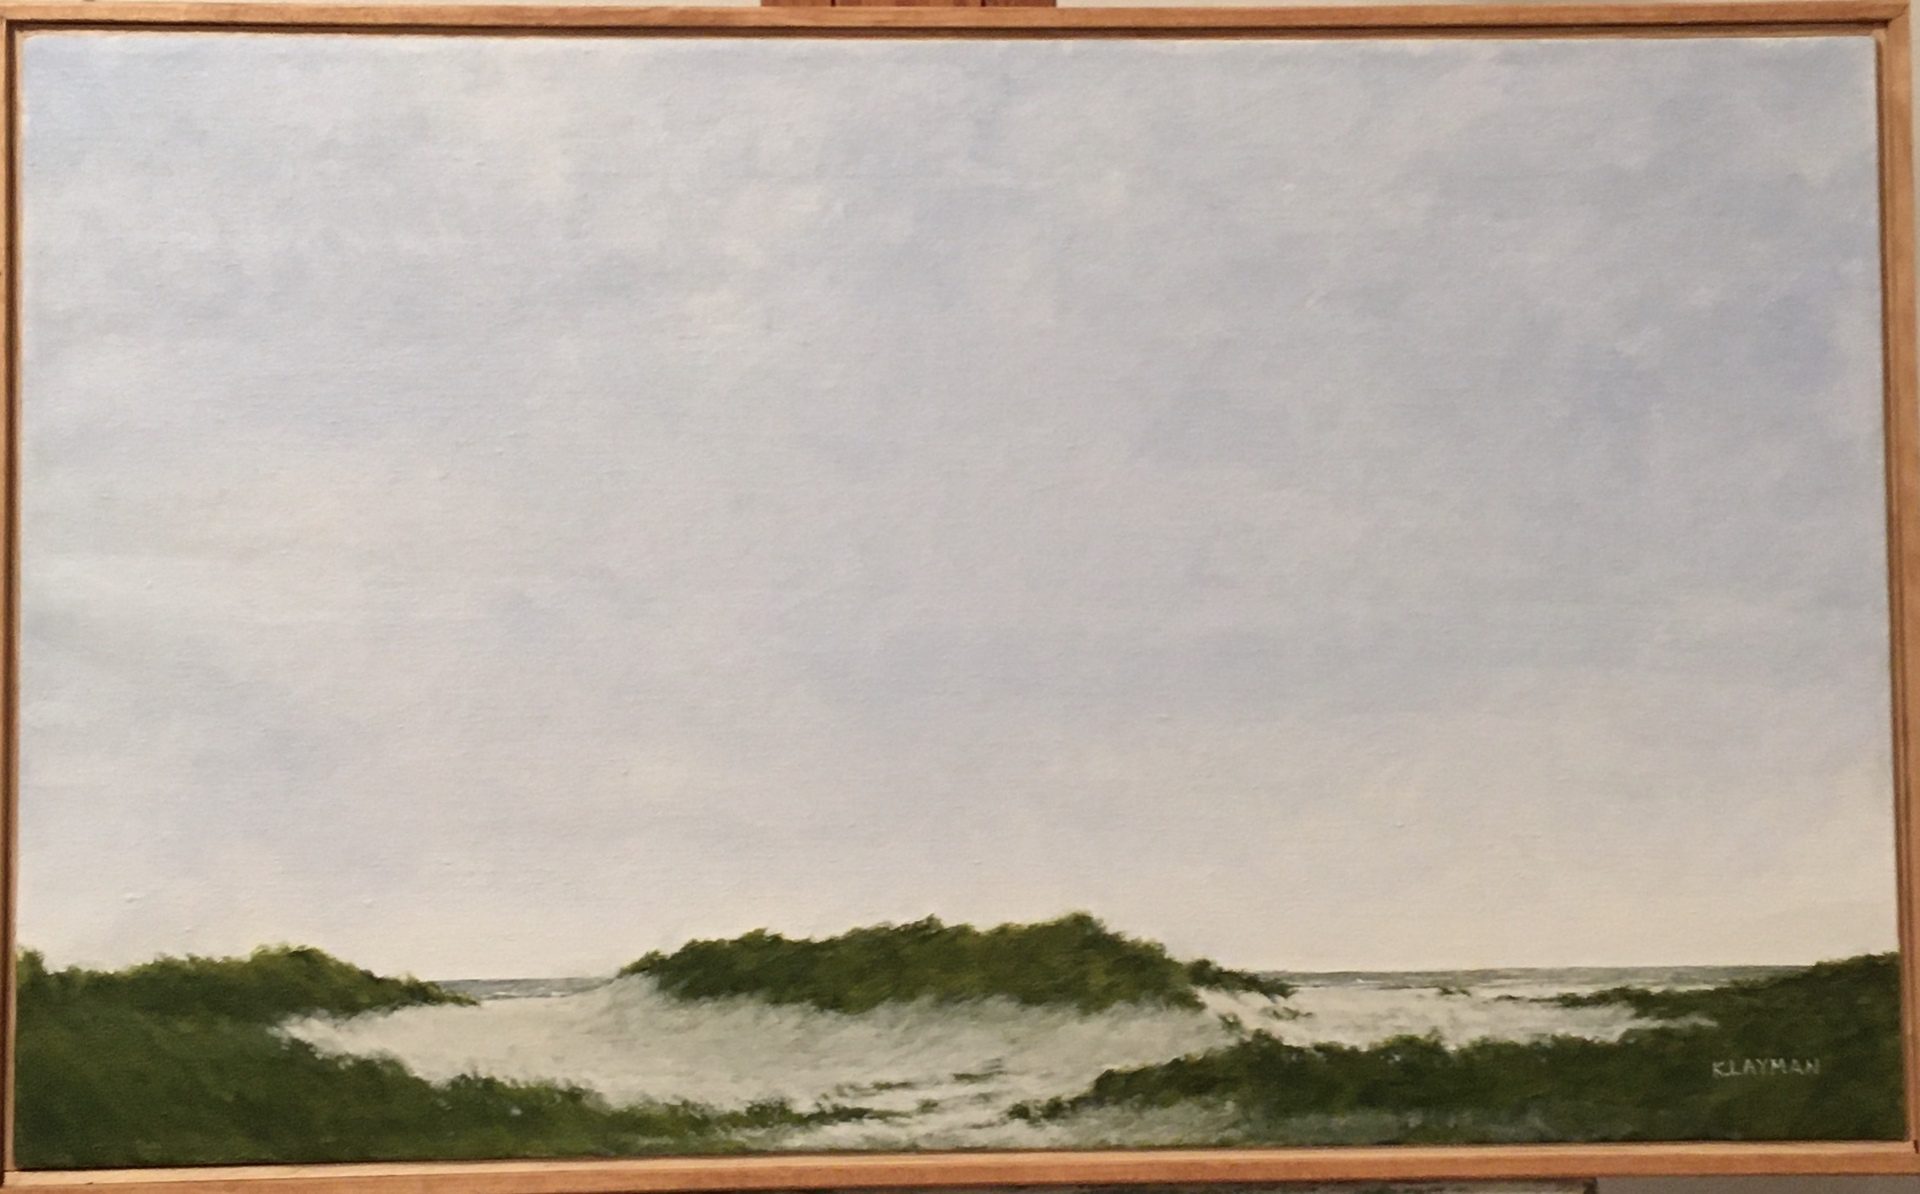 Painting Of A Gray Sky And Shore With Sand And Grass Hills